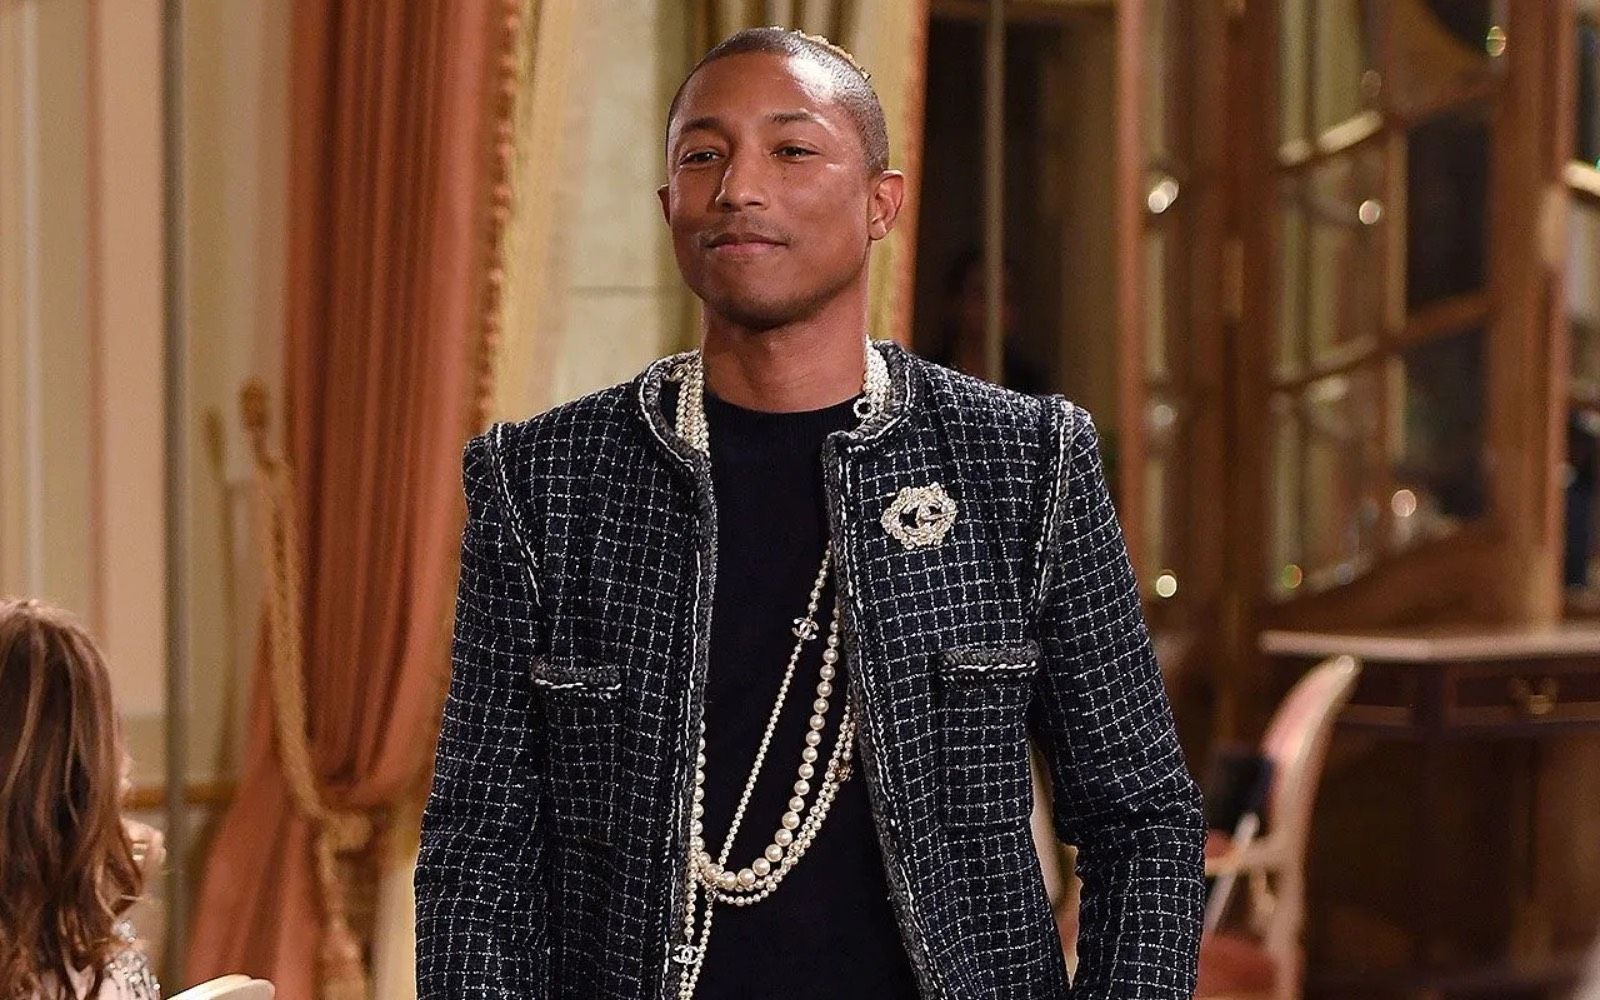 Behind Chanel's—Chic, Discrete, and Very Chanel—Move Into Menswear